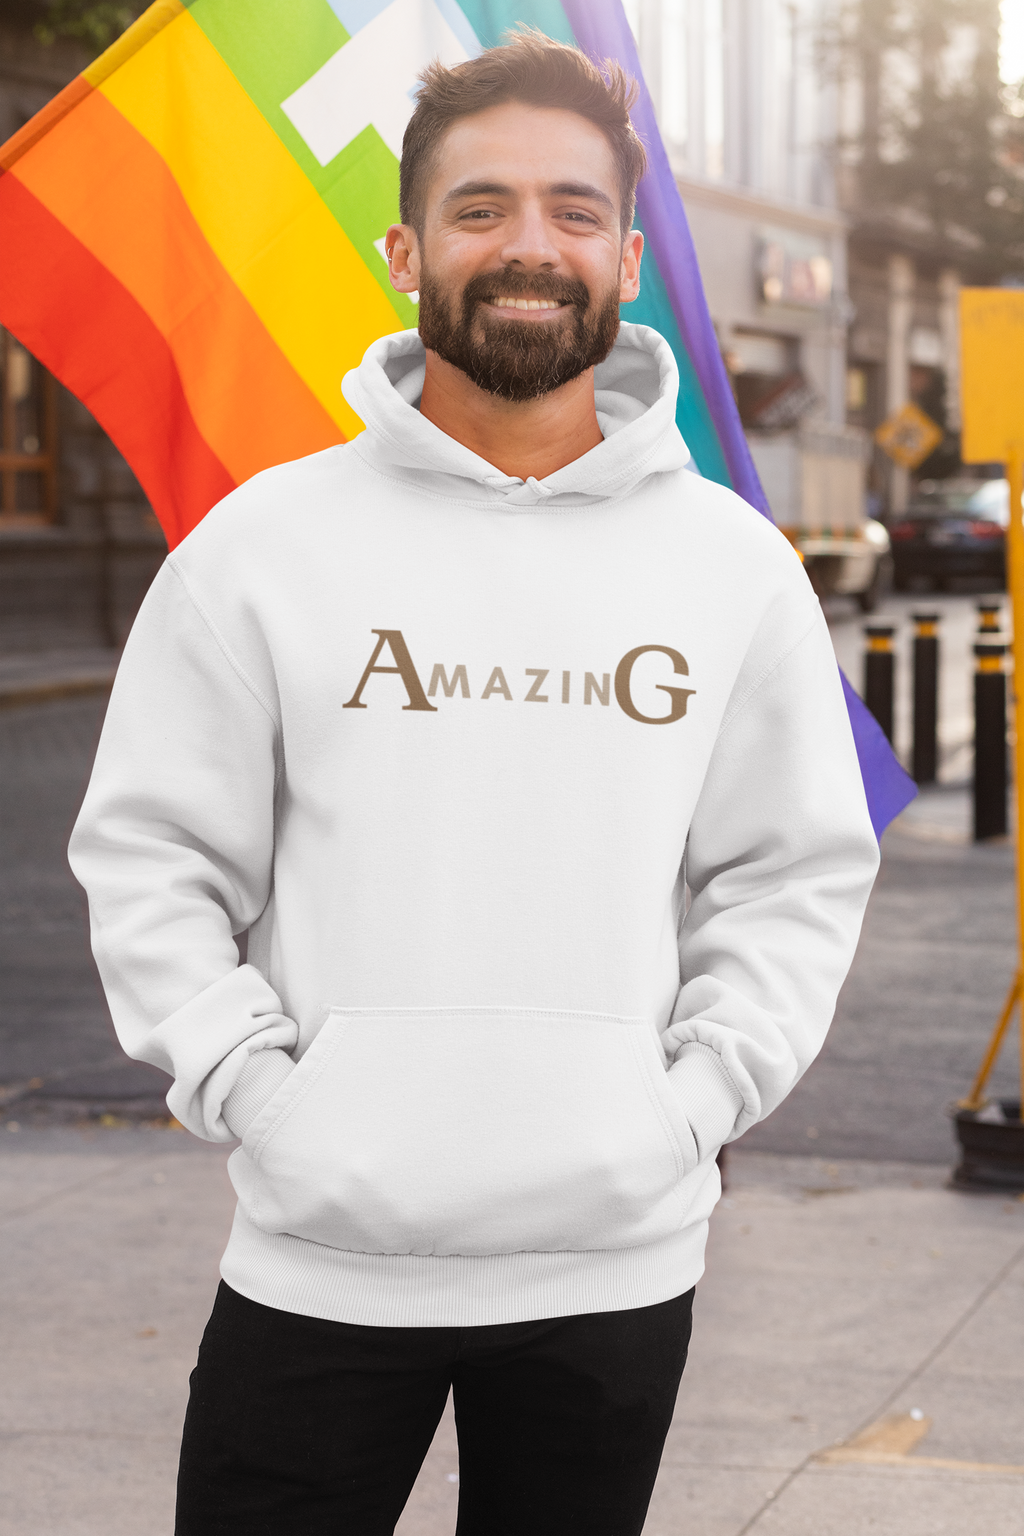 Amazing Unisex Hooded Sweatshirt, Classic Fit, Gift Item - Cheers Together Gift House